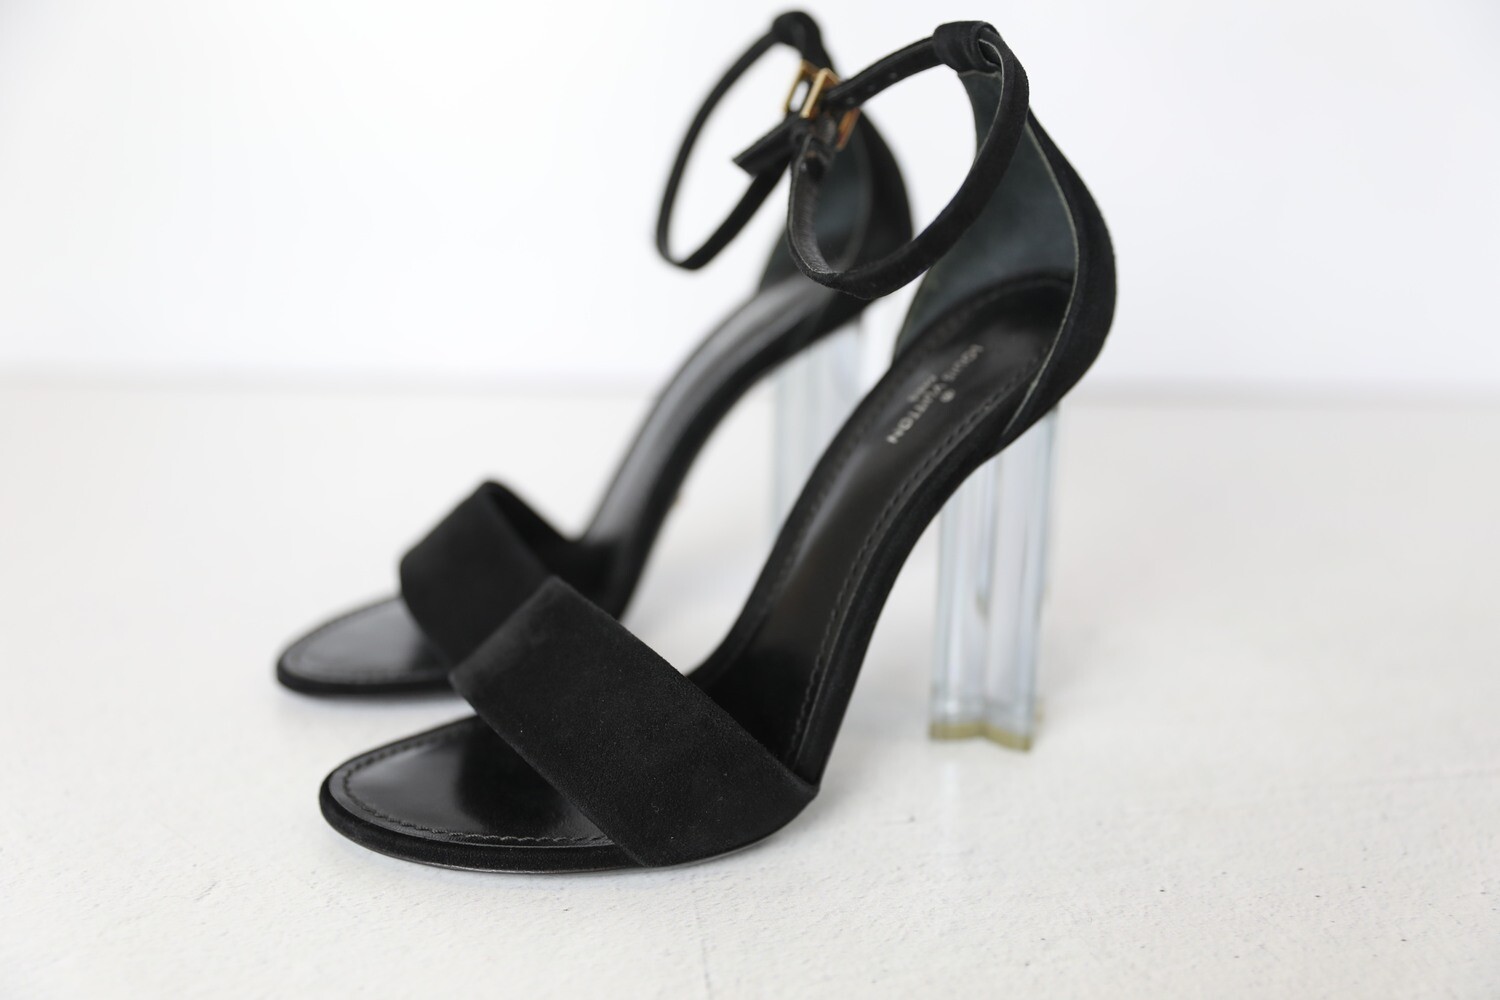 Louis Vuitton Heels, Black with Clear Heels, Size 37, Preowned in Box WA001